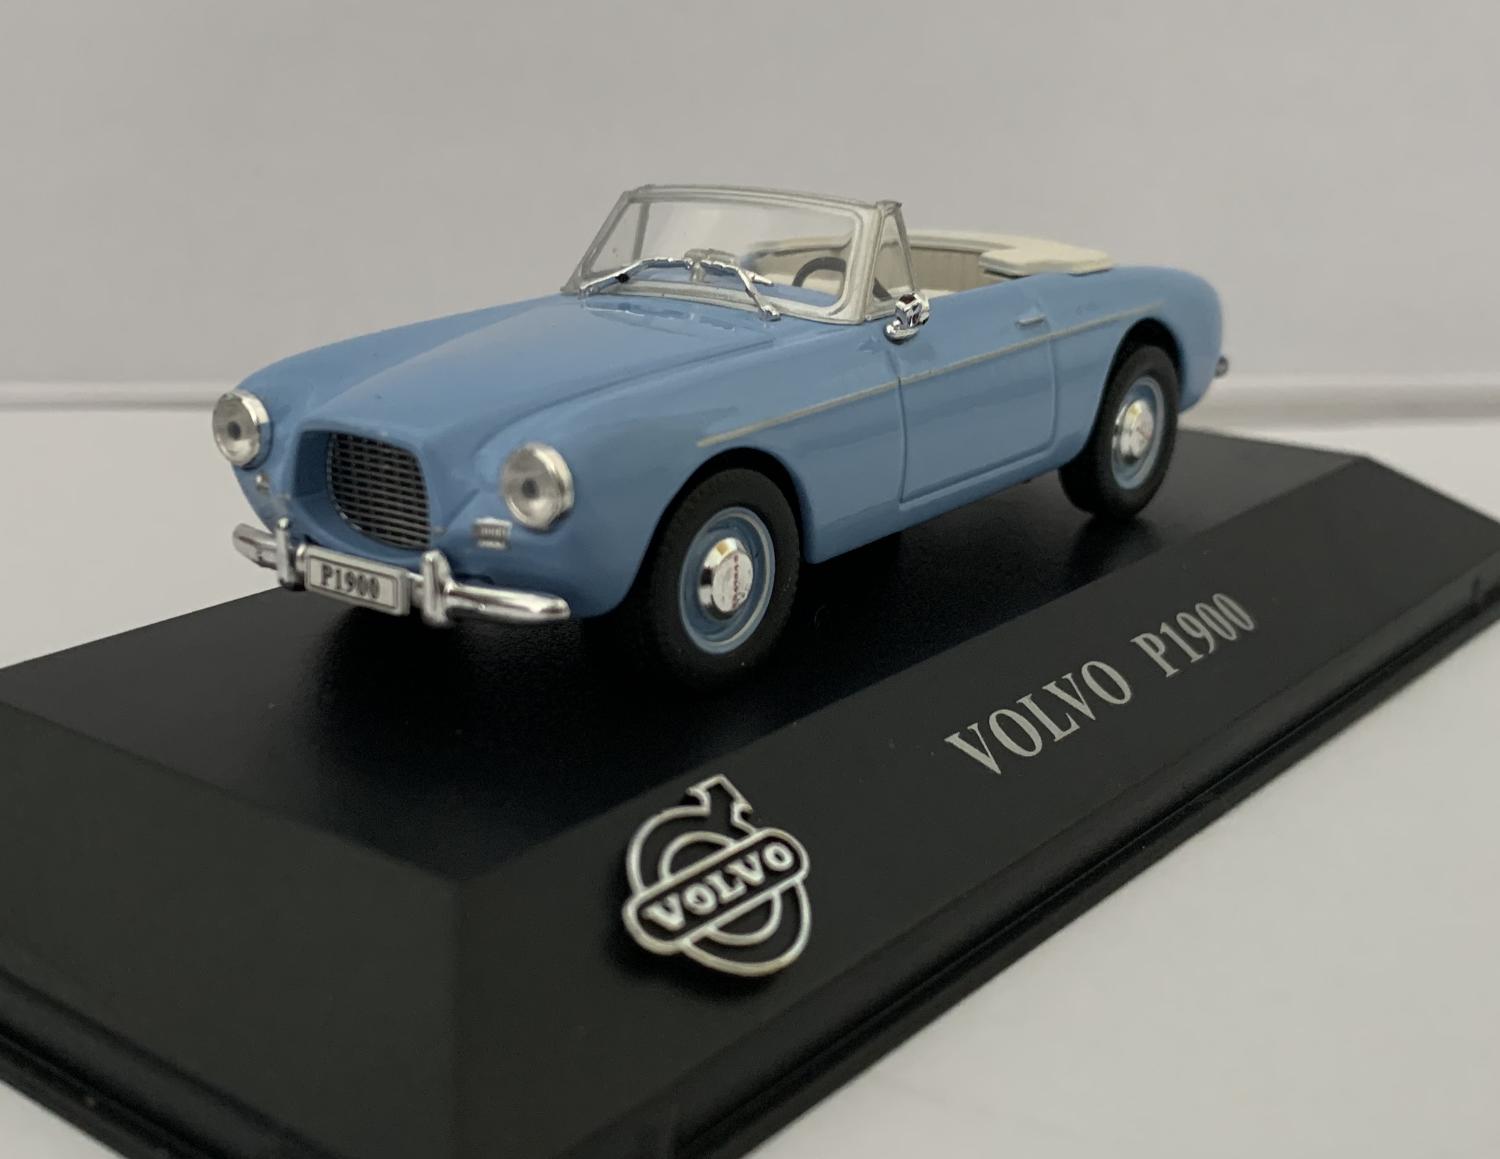 1956 Volvo P1900 in light blue 1:43 scale classic car model from Atlas Editions